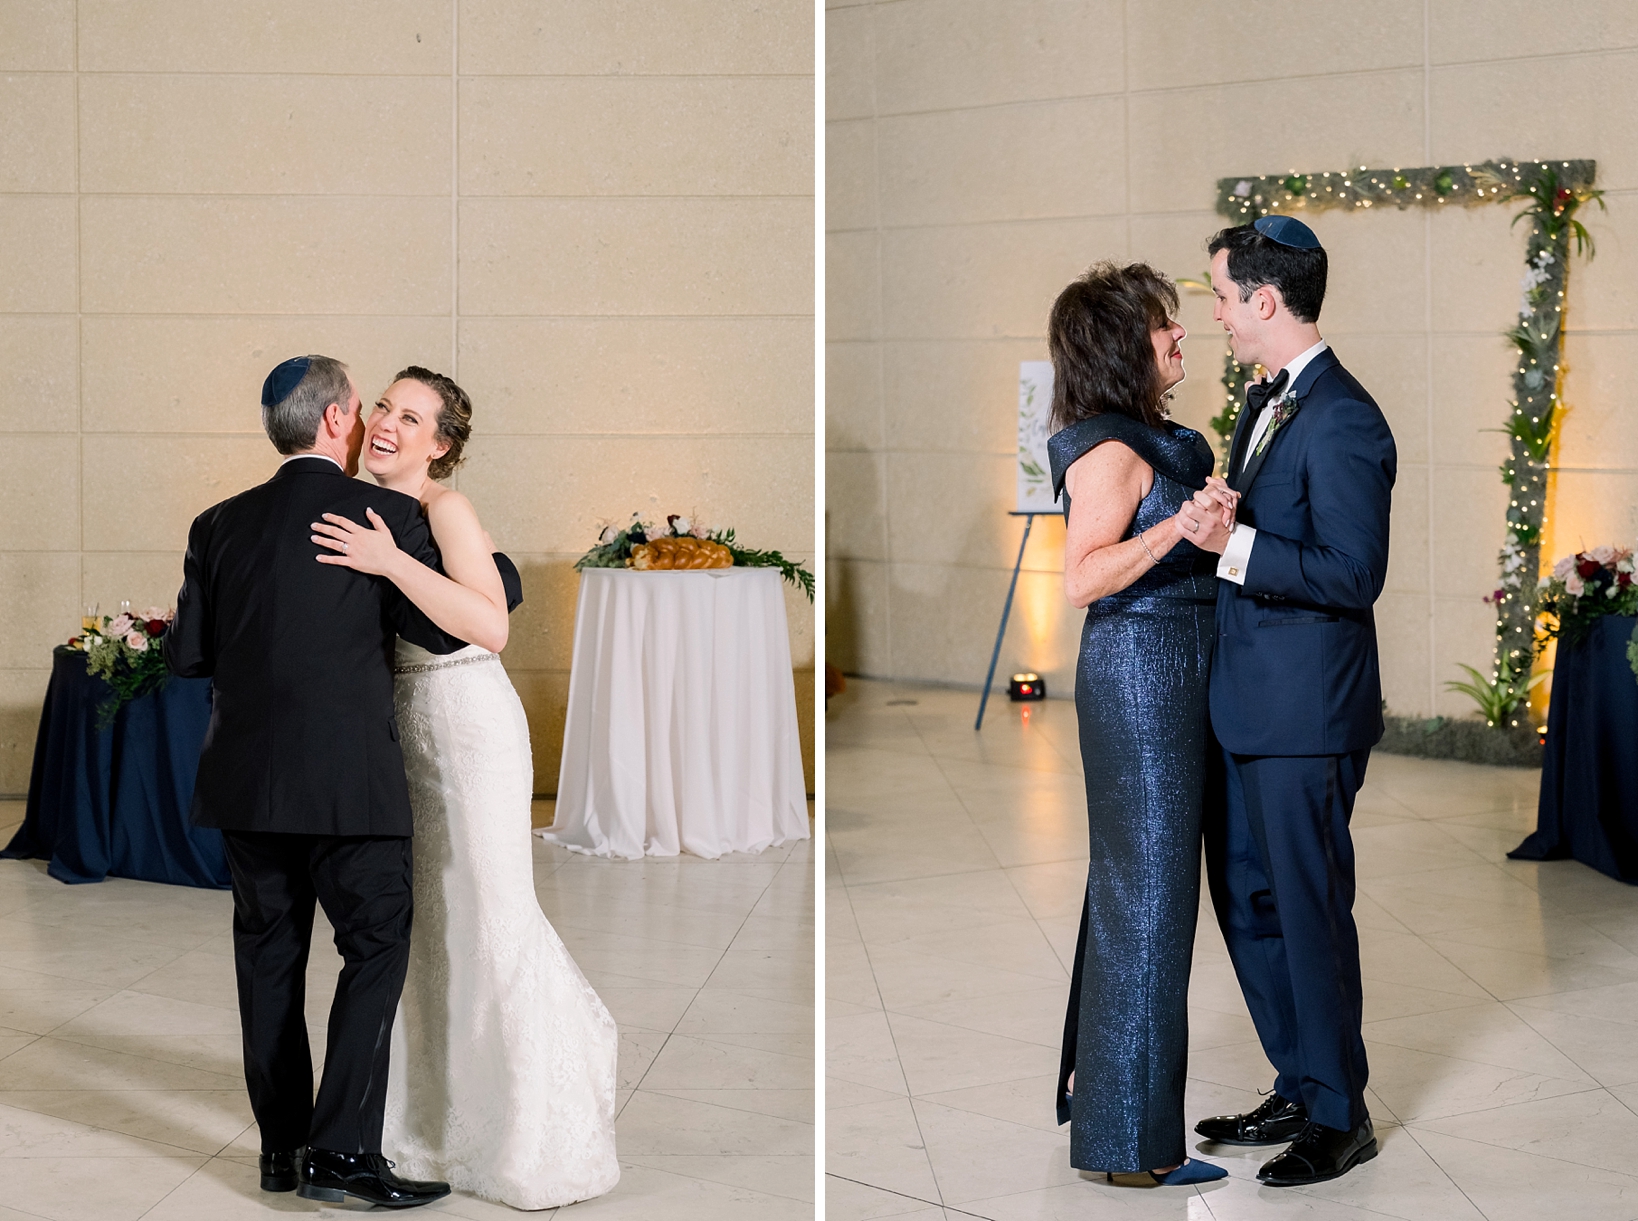 The parent dances at the Museum of fine arts in St. pete, FL by Sarah & Ben Photography